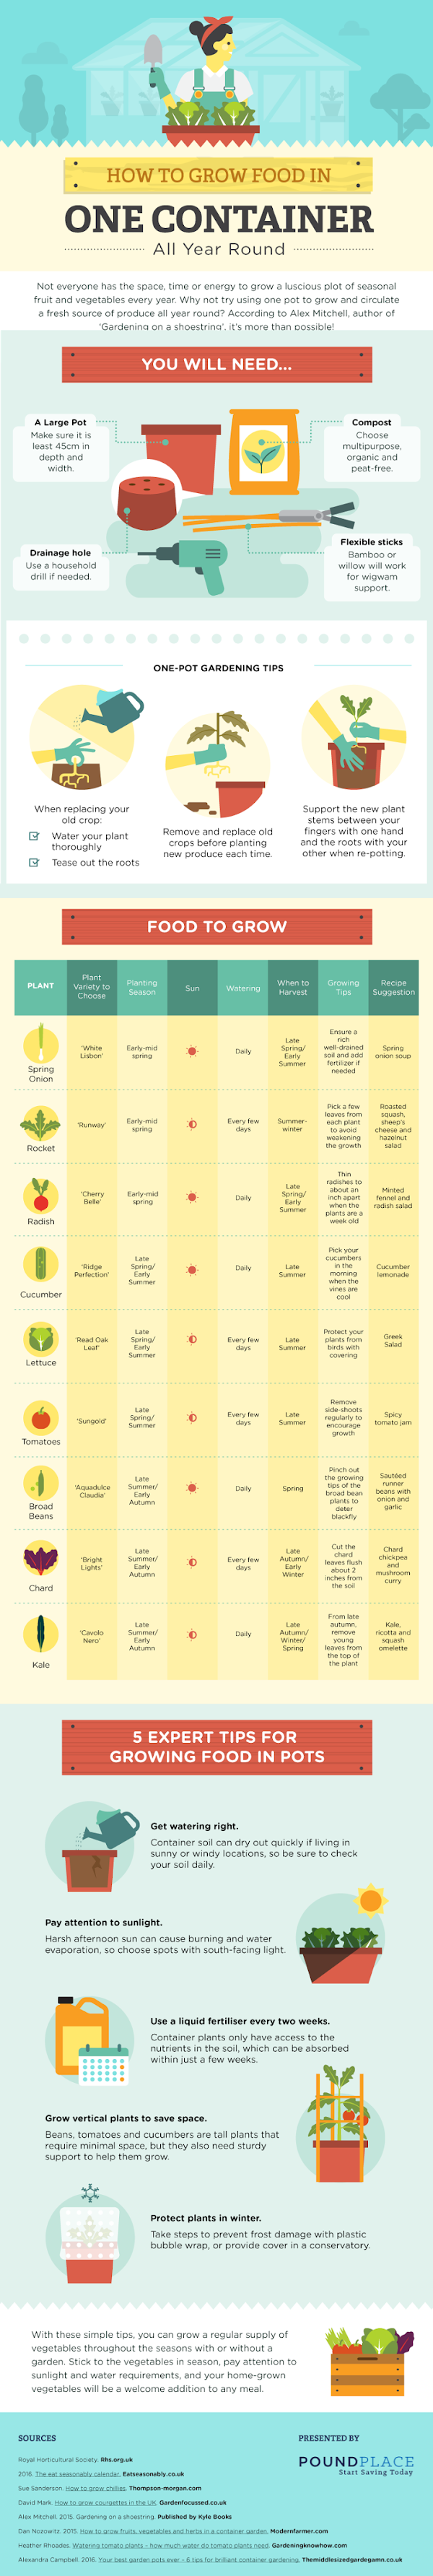 http://www.thegreenfamilia.com/wp-content/uploads/2016/11/How-to-grow-food-in-one-container-all-year-round.png